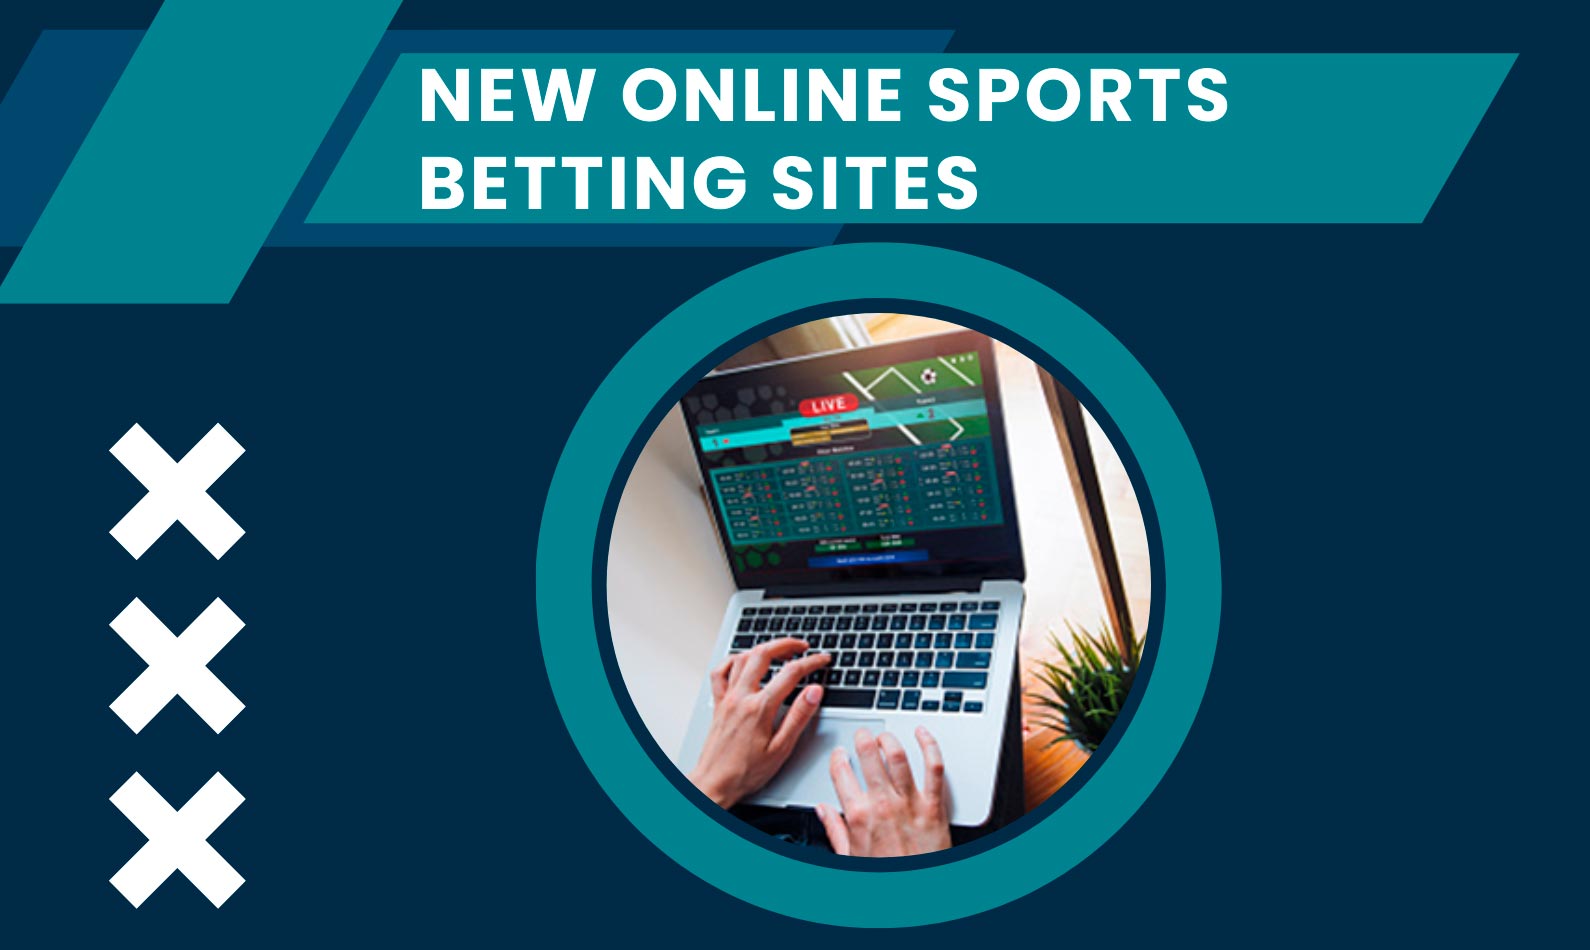 Information about new online sports betting sites